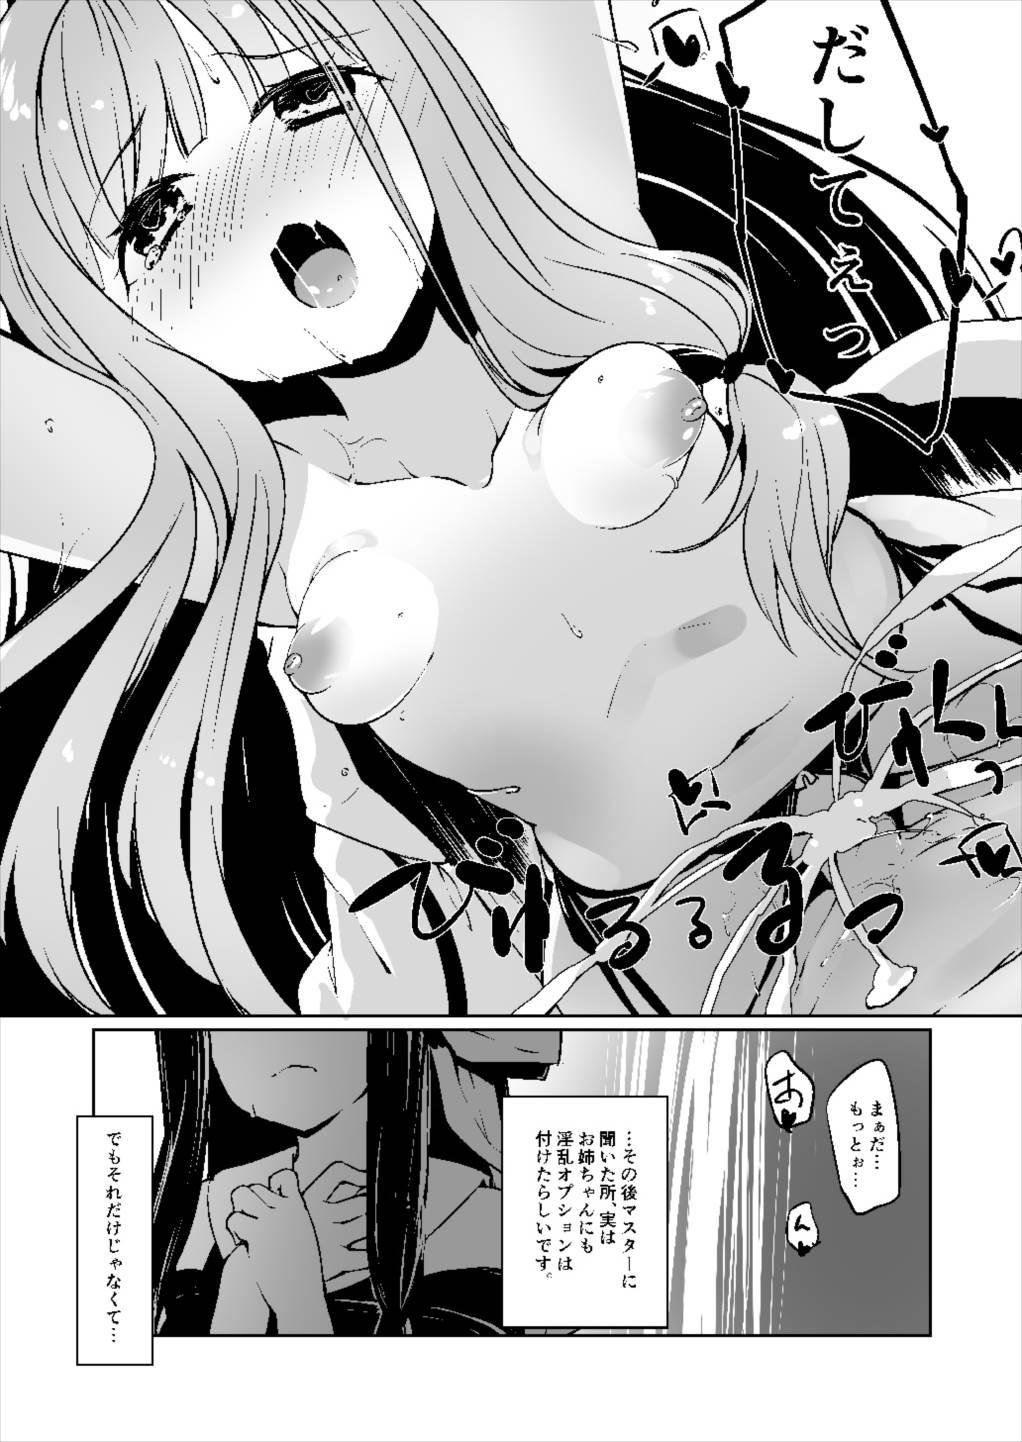 Consolo コトノハラバーズ VOL.06 【お姉ちゃん観察日記】 - Vocaloid Voiceroid 3some - Page 7